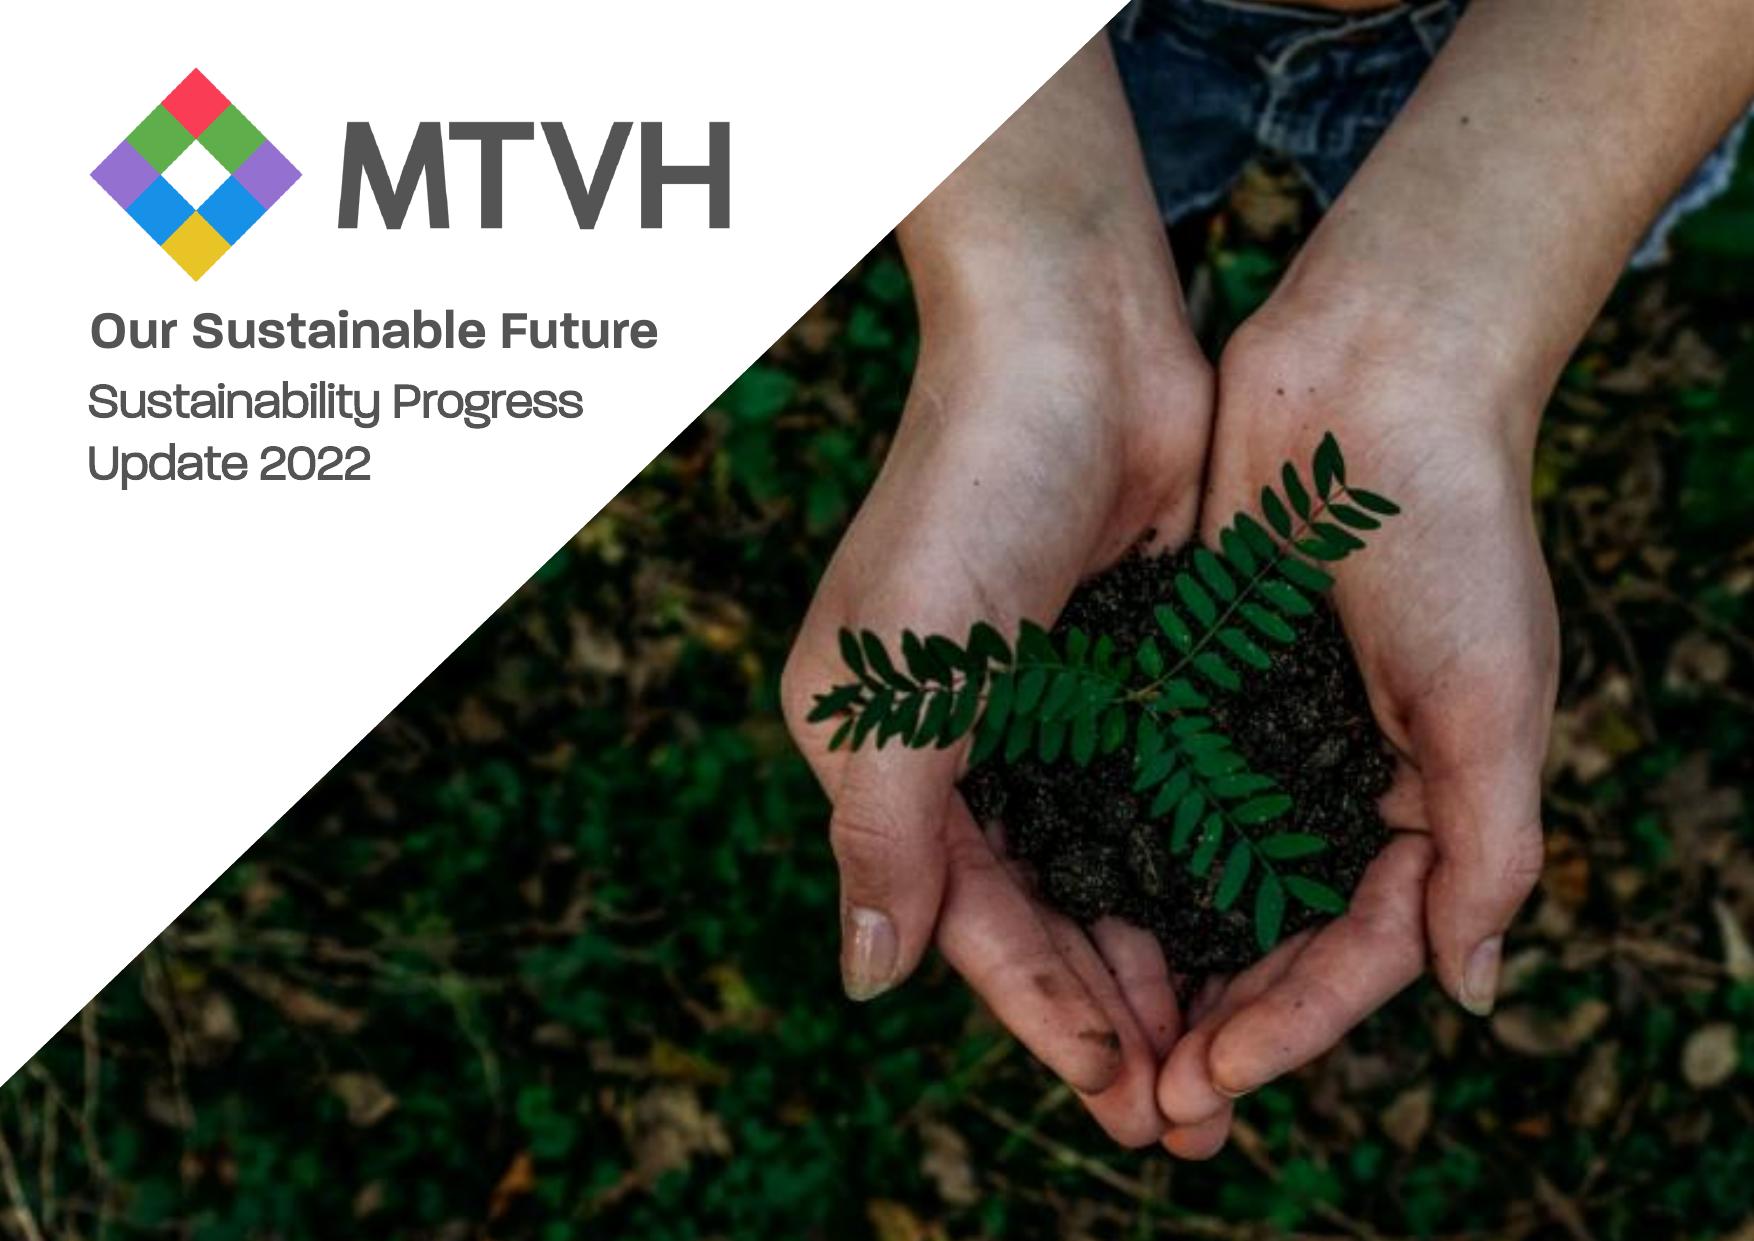 MTVH 2022 Annual Report